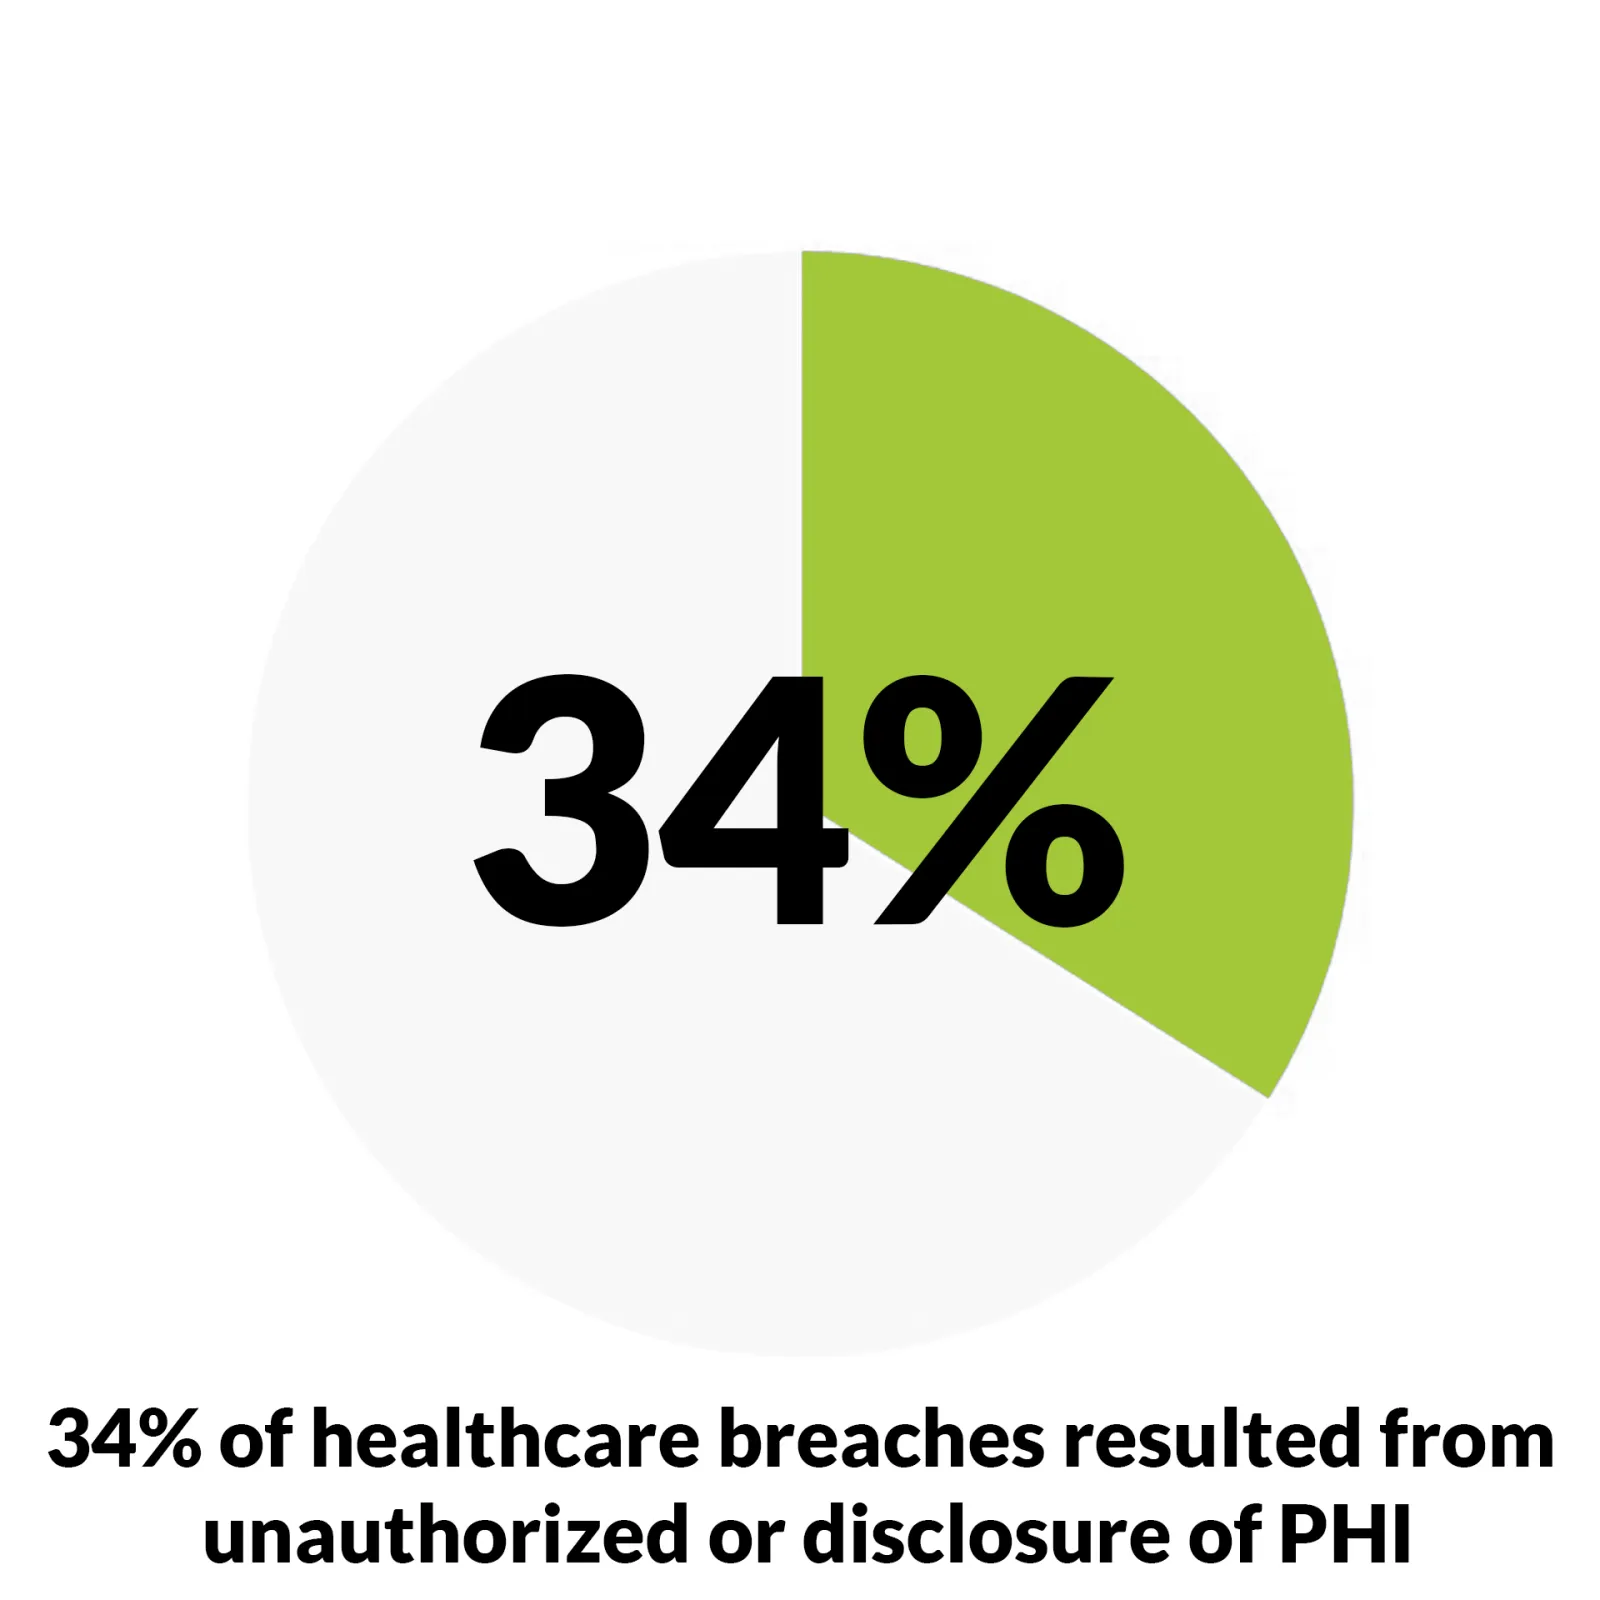 34% of healthcare breaches resulted from unauthorized or disclosure of PHI